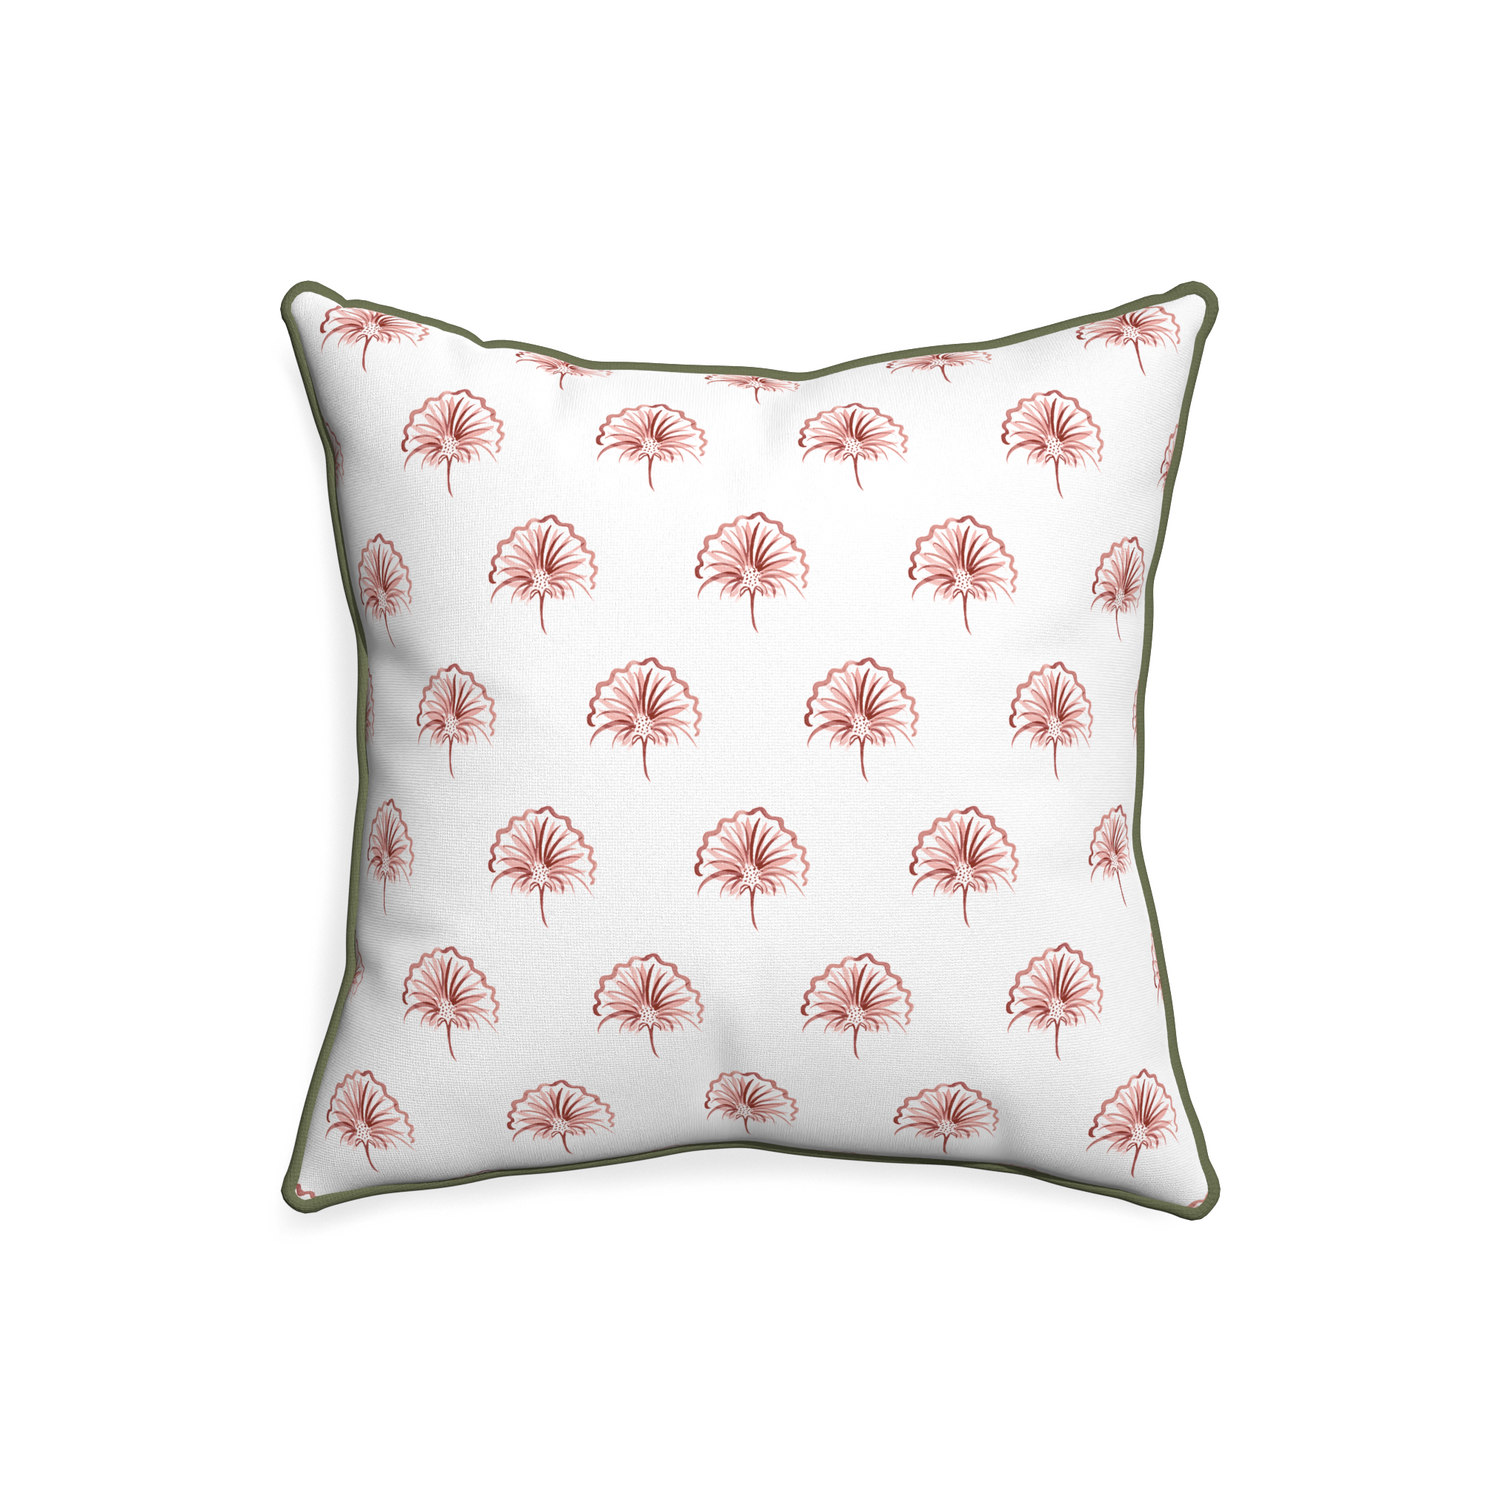 20-square penelope rose custom floral pinkpillow with f piping on white background